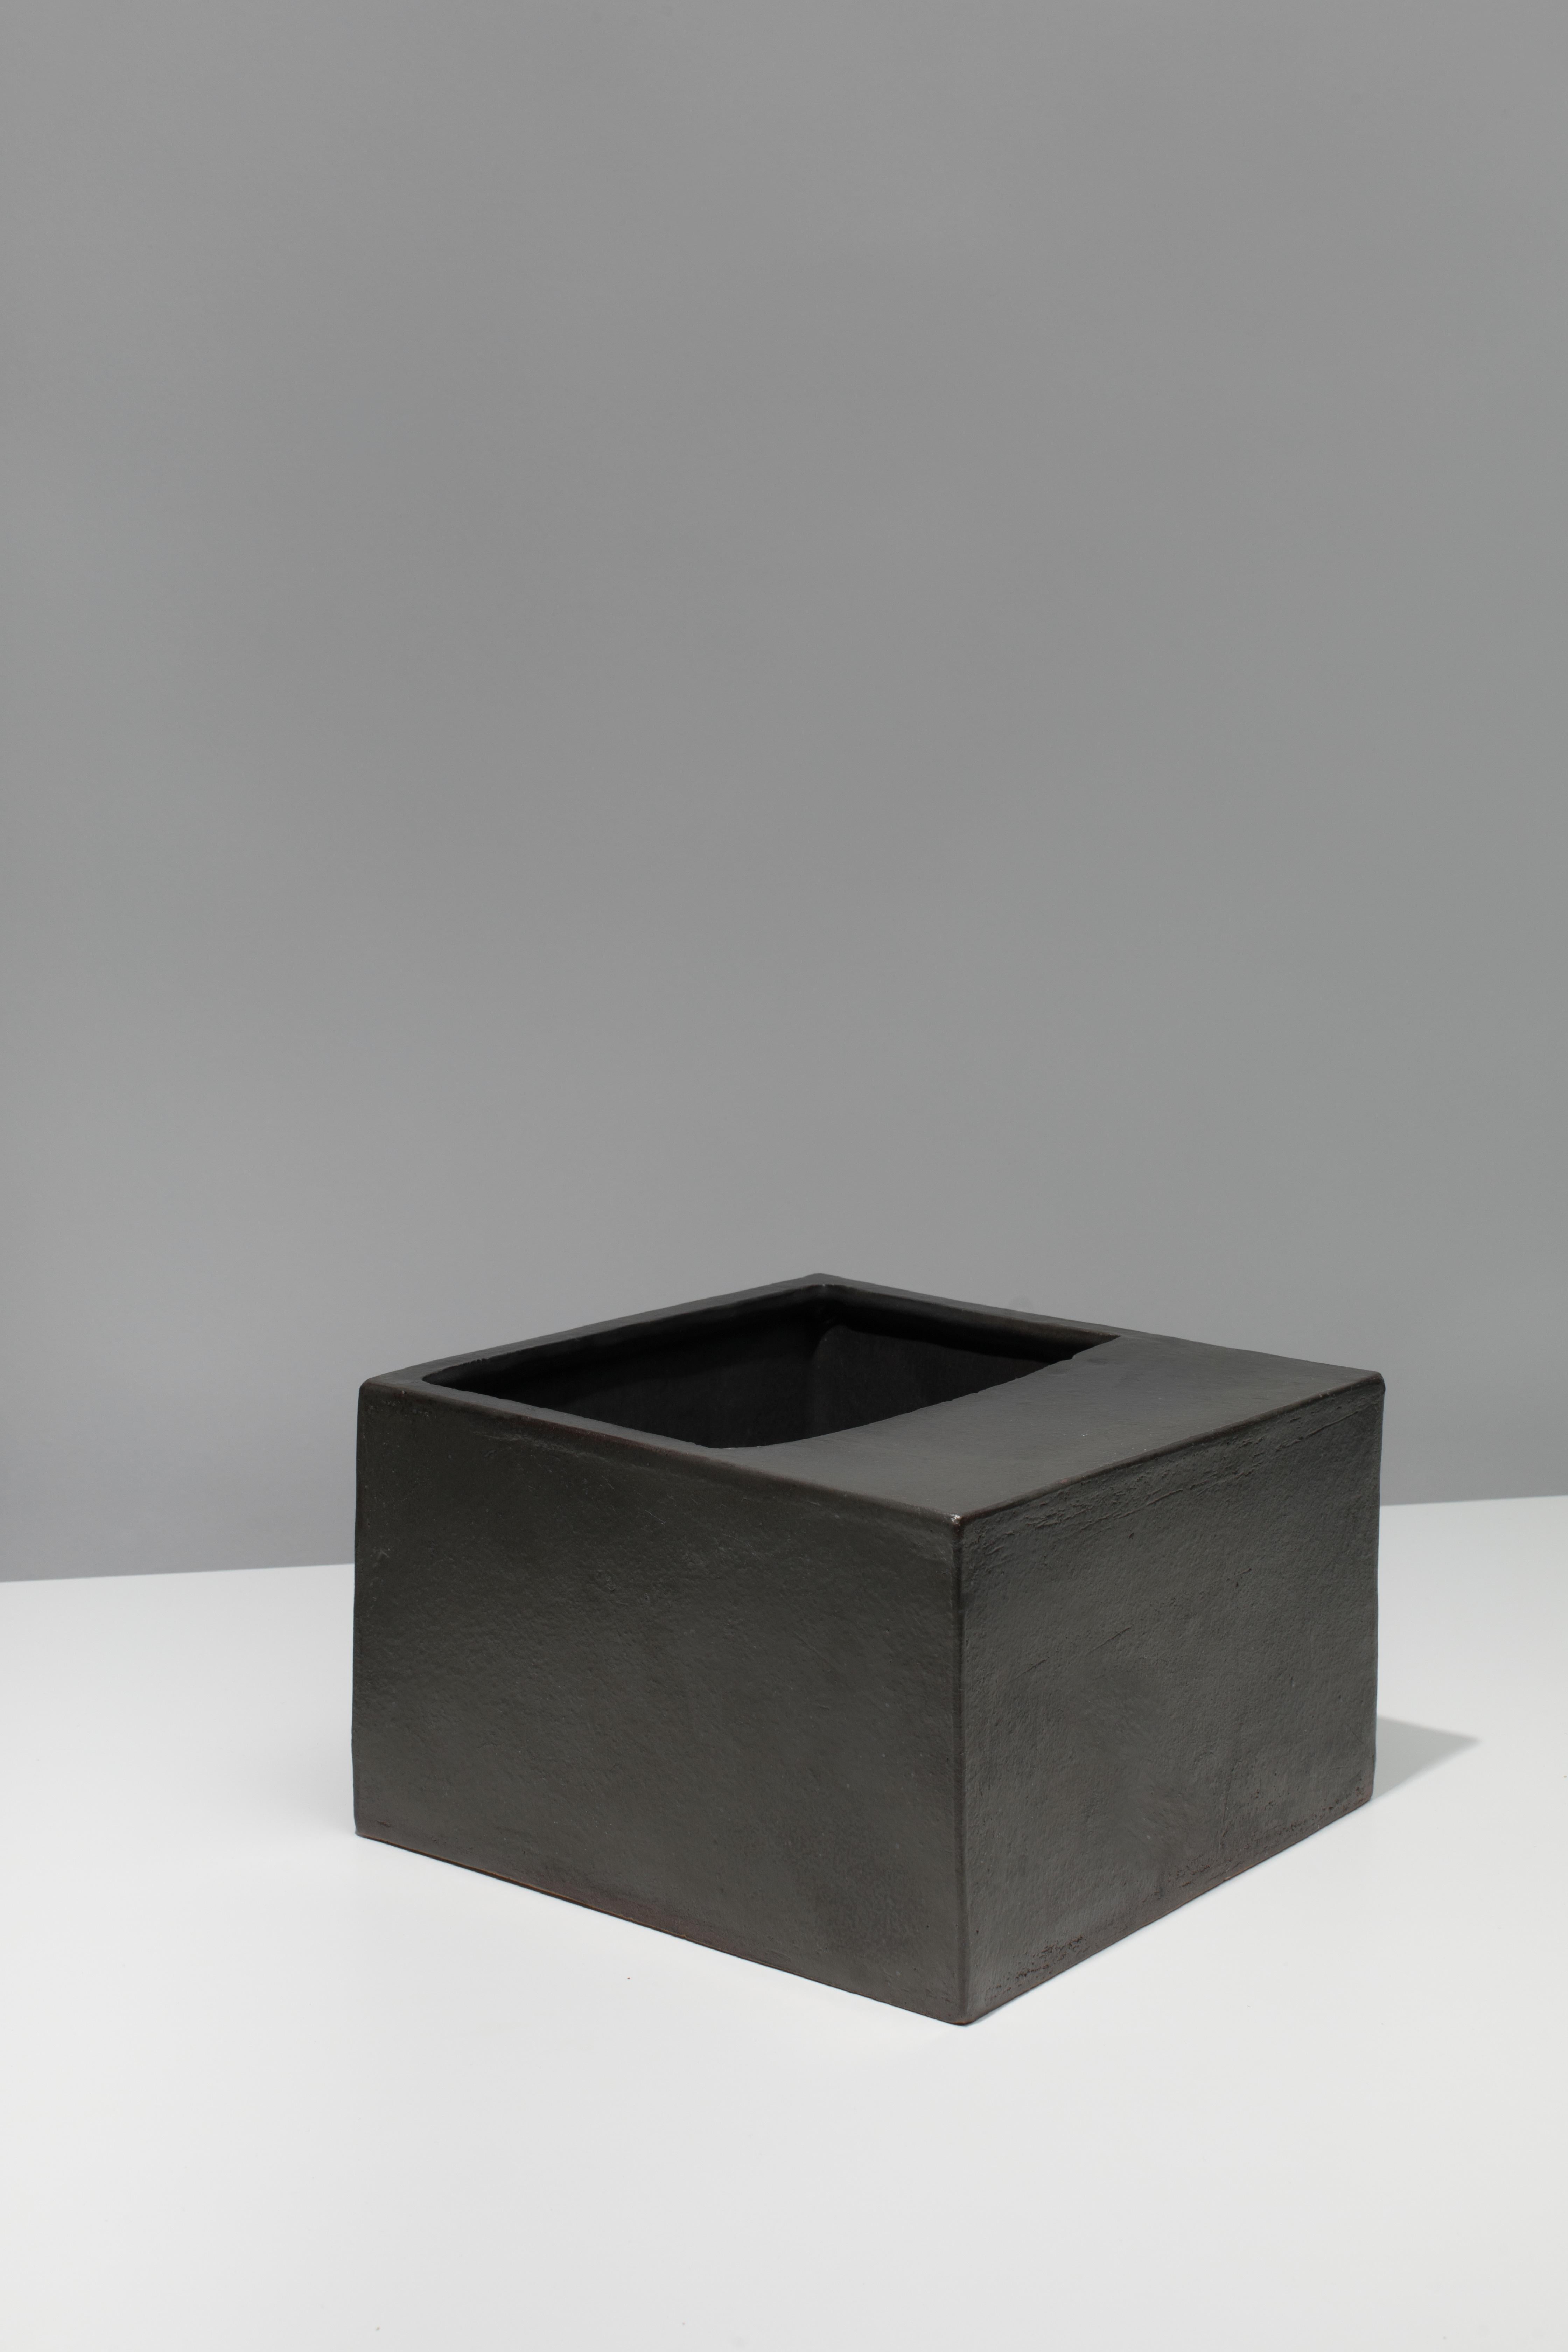 Wheel-thrown and slab-built ceramic vessel with black coppered glaze. Marked with an engraved bronze label to underside: Jonathan Nesci w/ Robert Pulley 18/09. 

Designed by Jonathan Nesci and made in Columbus, Indiana by local ceramist Robert